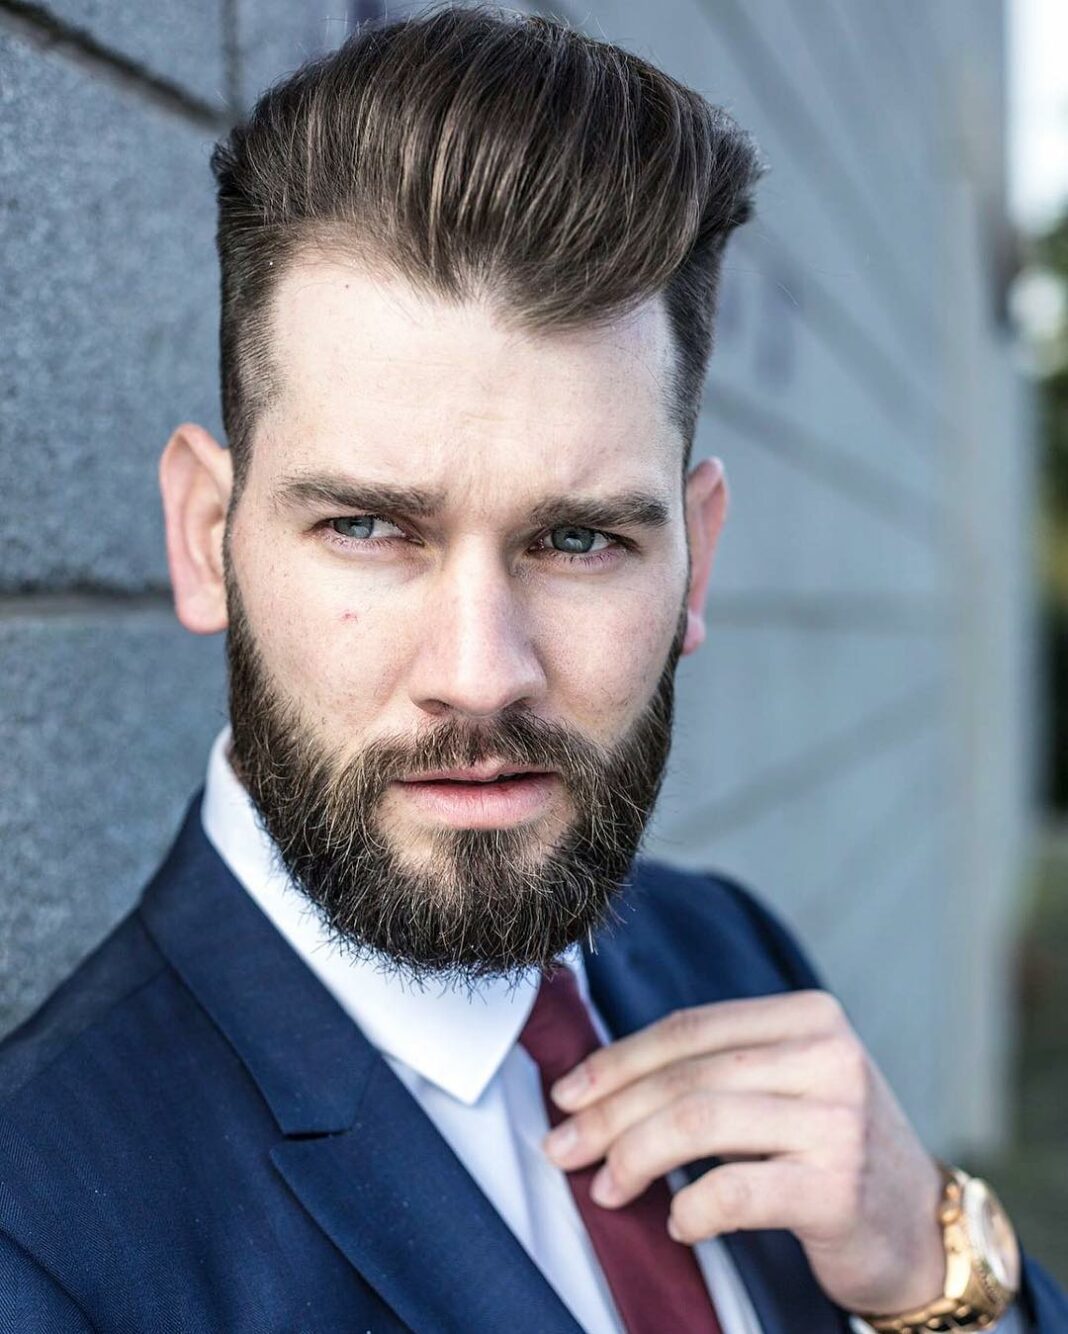 Top 20 Businessman Haircuts to Look Professional